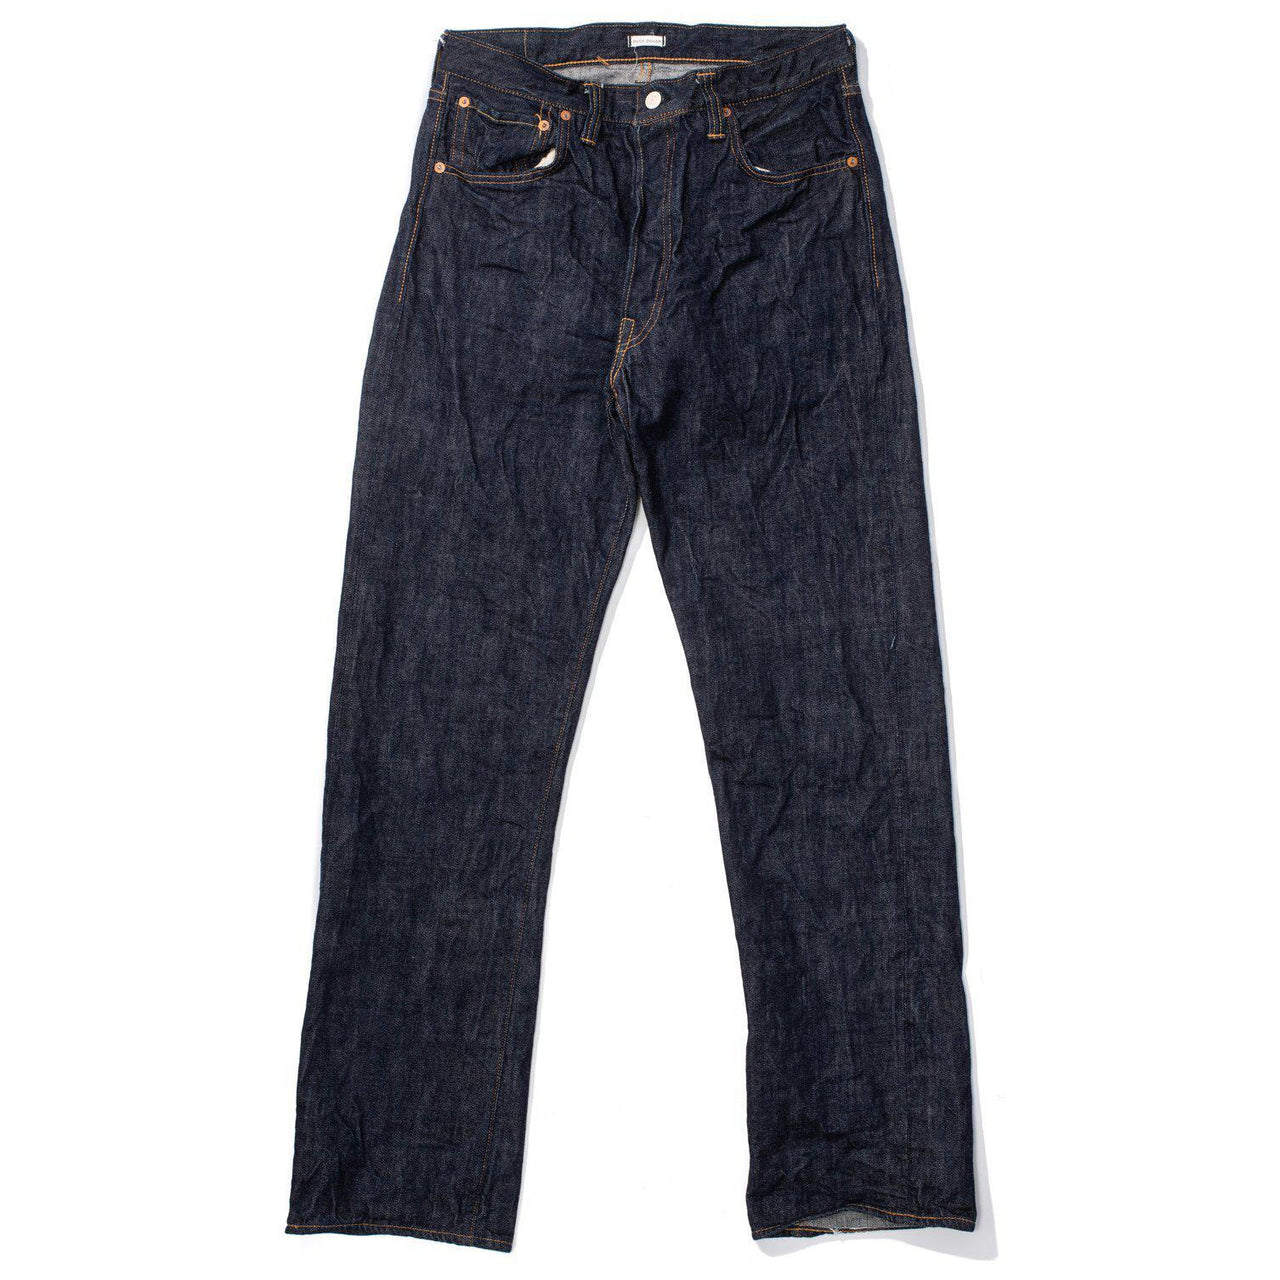 Warehouse & Co. Duck Digger Lot. 1001XX 13.5oz Jean-Jeans-Clutch Cafe ...